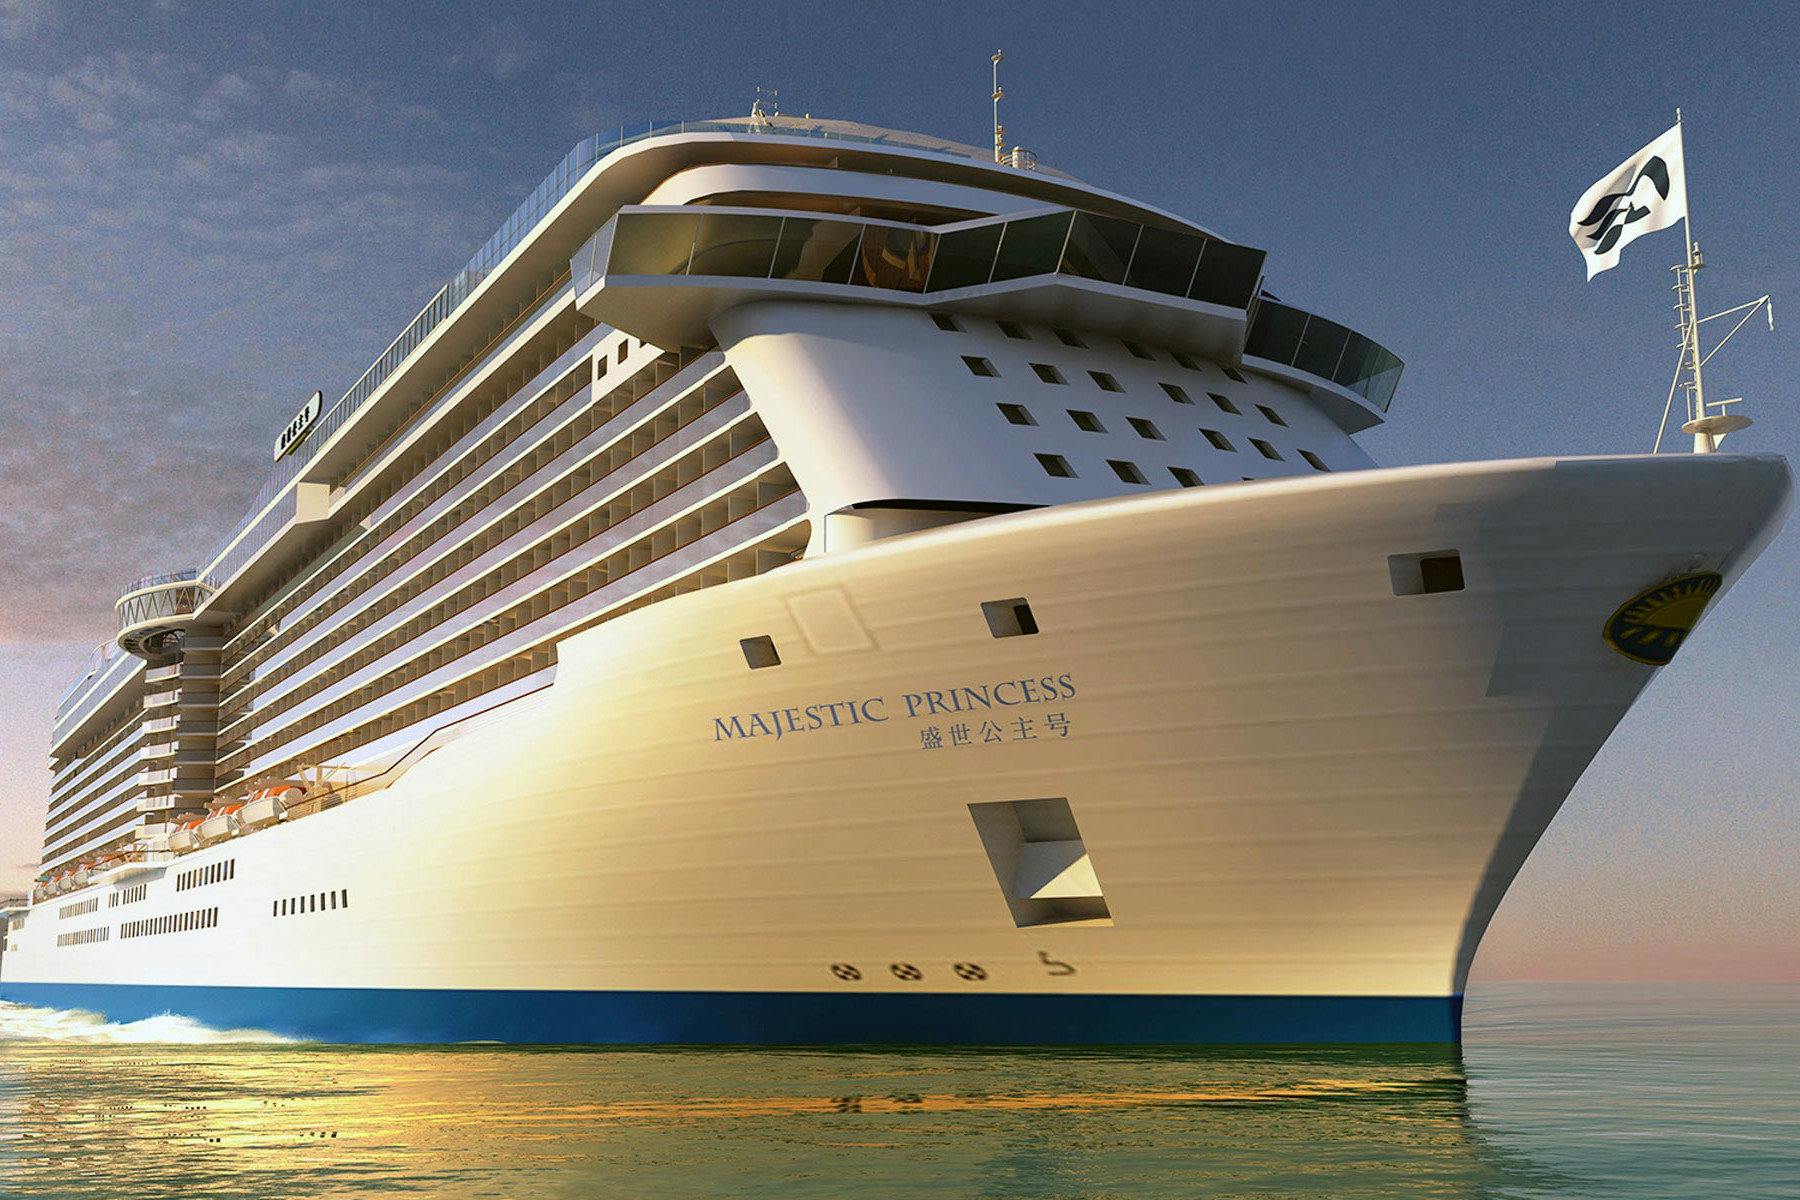 Majestic Princess Cruise Review by jayrod29 - June 11, 2022